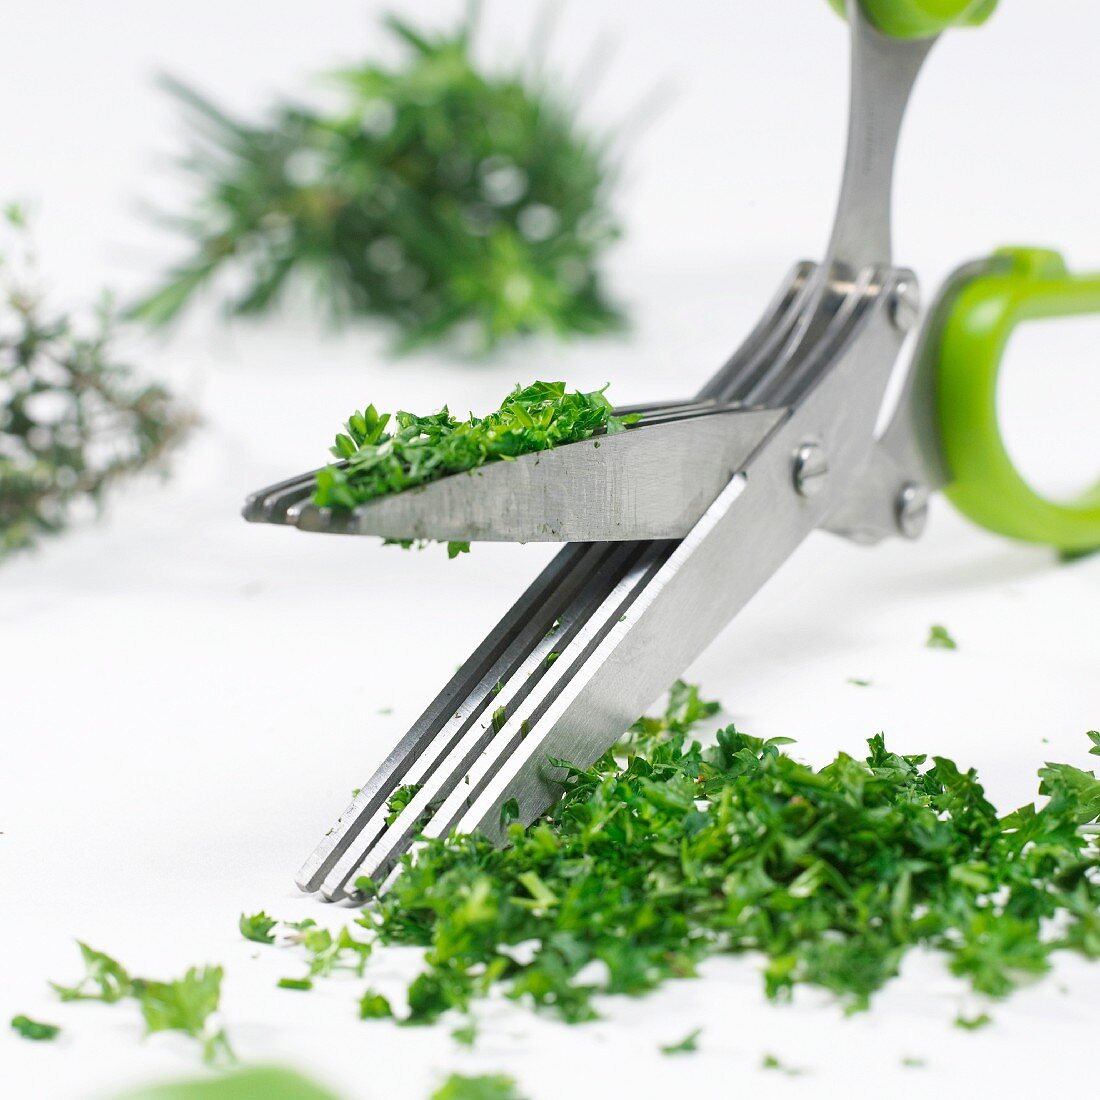 Herb scissors with multiple blades